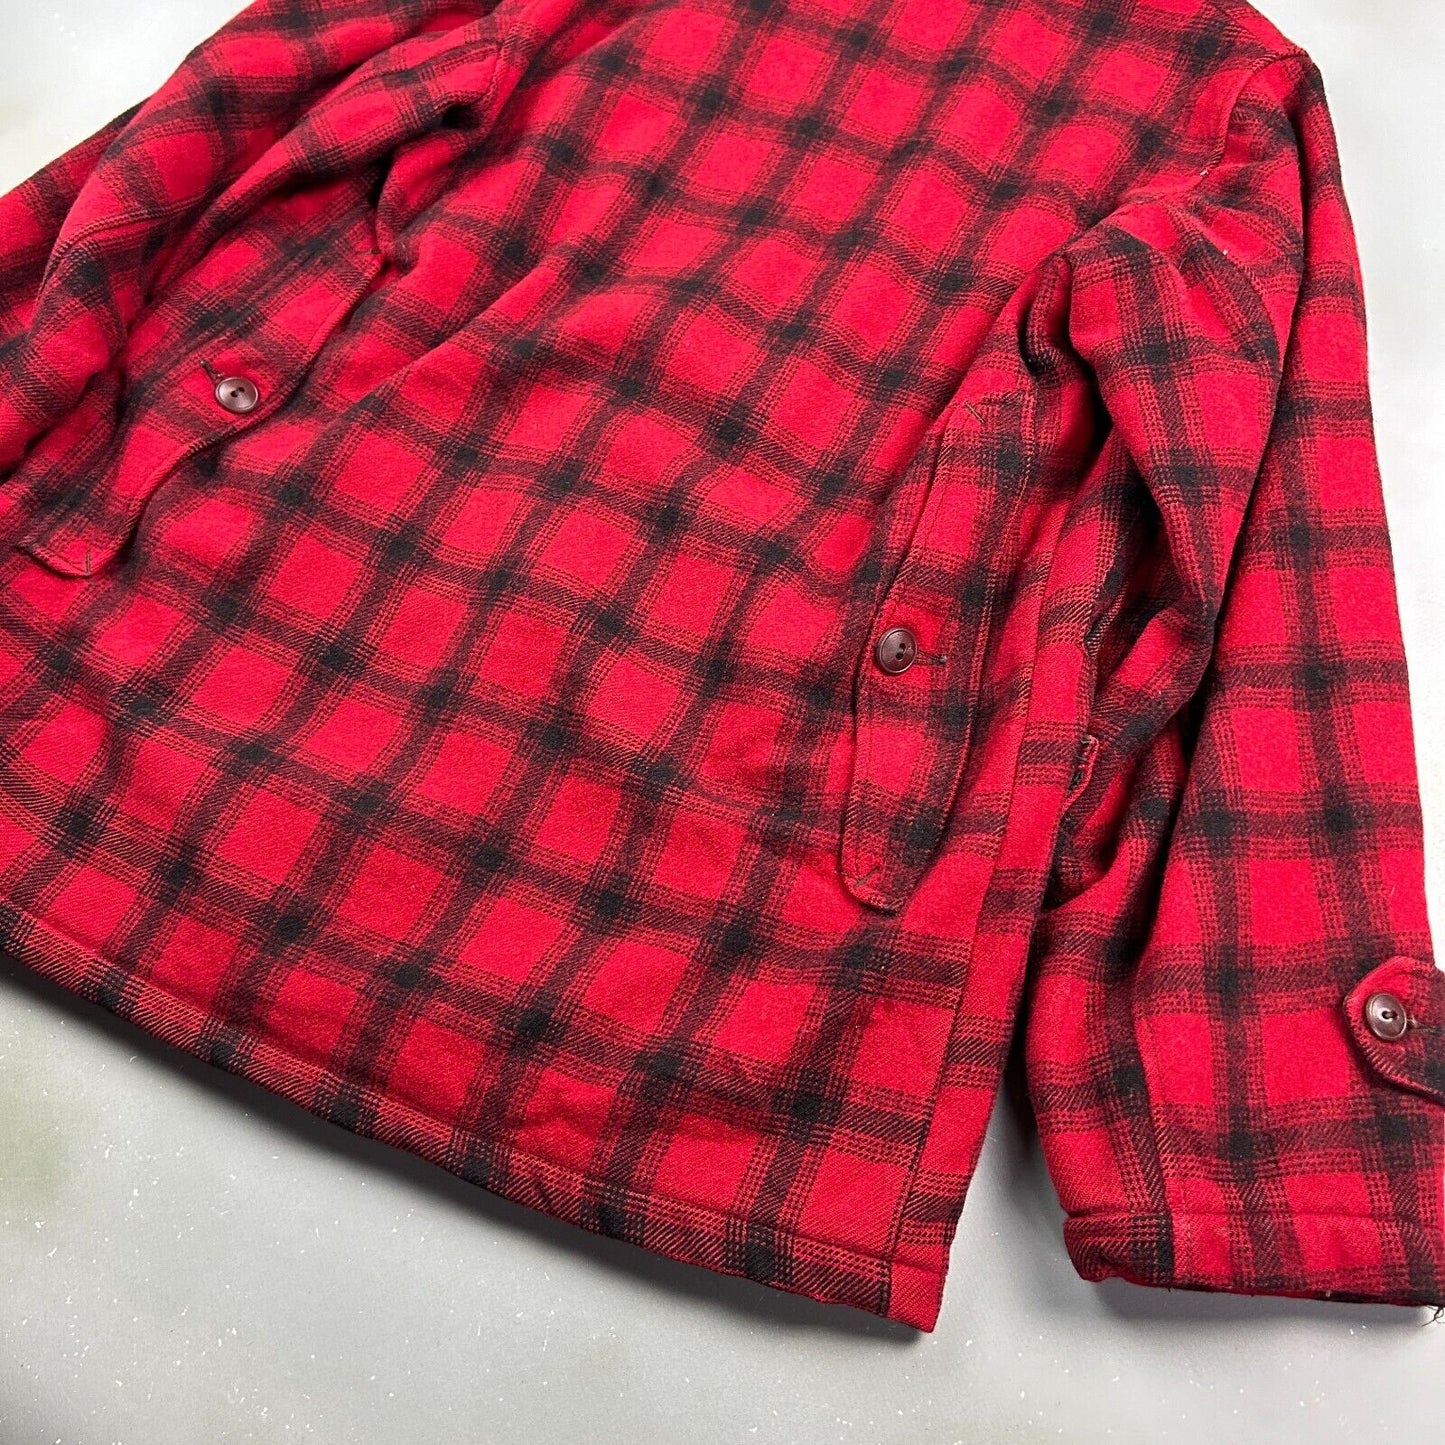 VINTAGE 80s | Woolrich Wool Plaid Flannel Lined Jacket sz S Adult